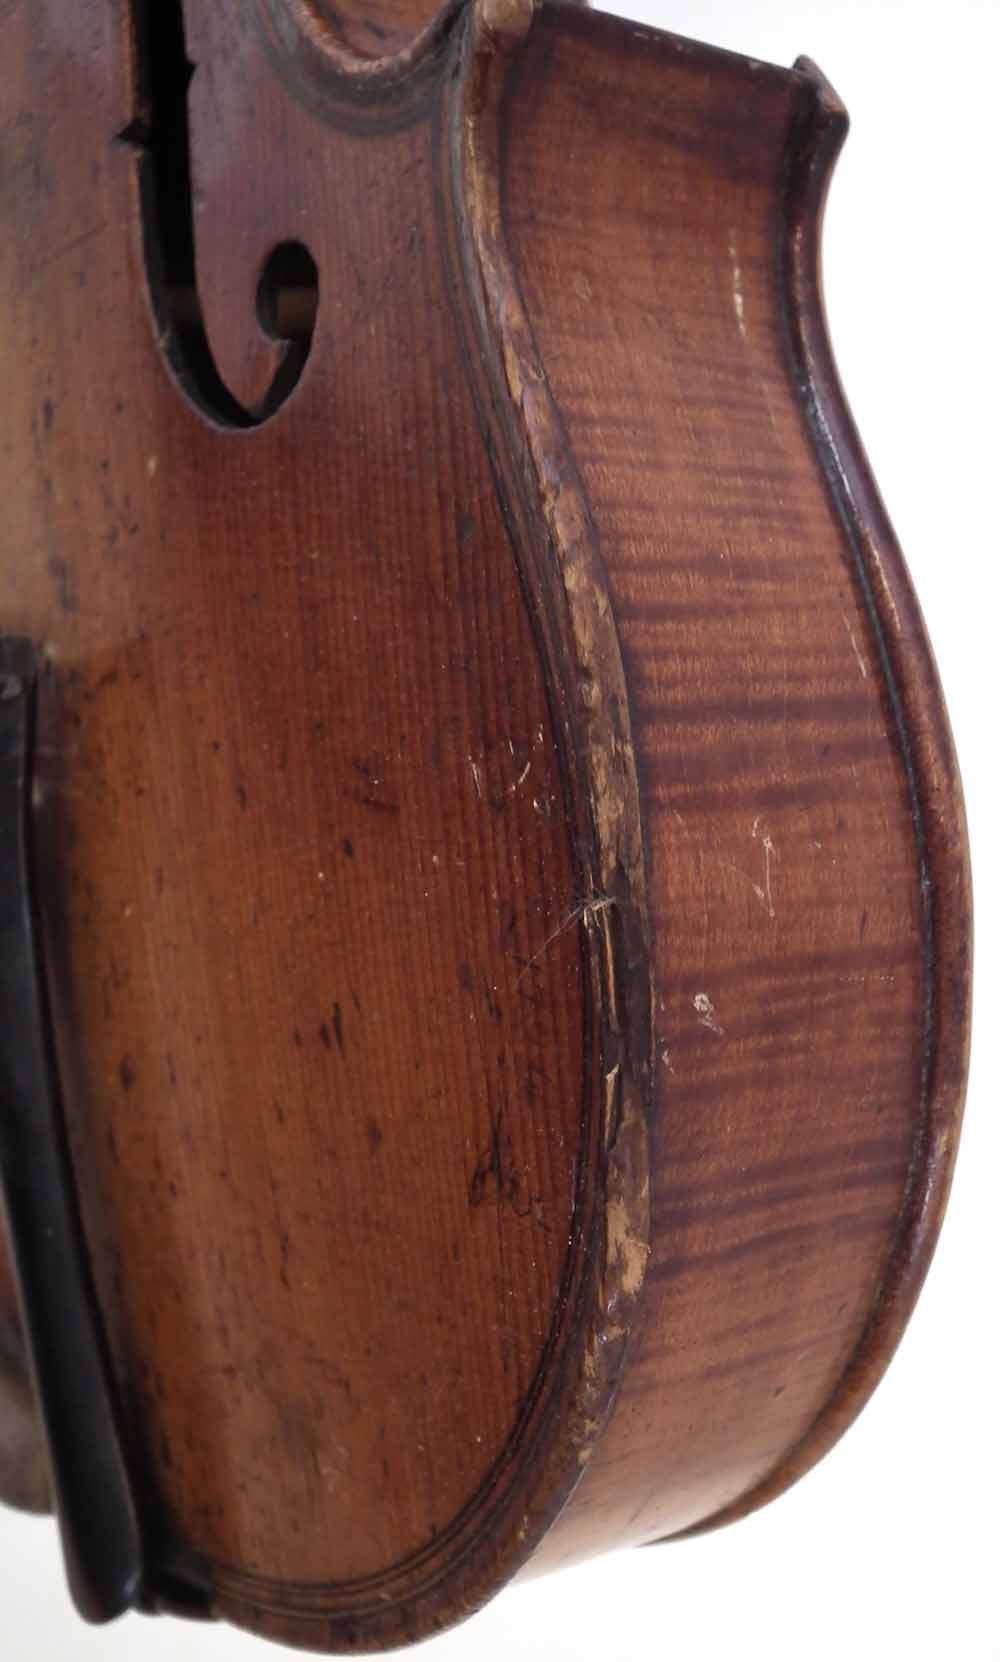 Violin in the style of Gaspar da Salo, with one piece tightly flamed back, double line purfling, - Image 8 of 17